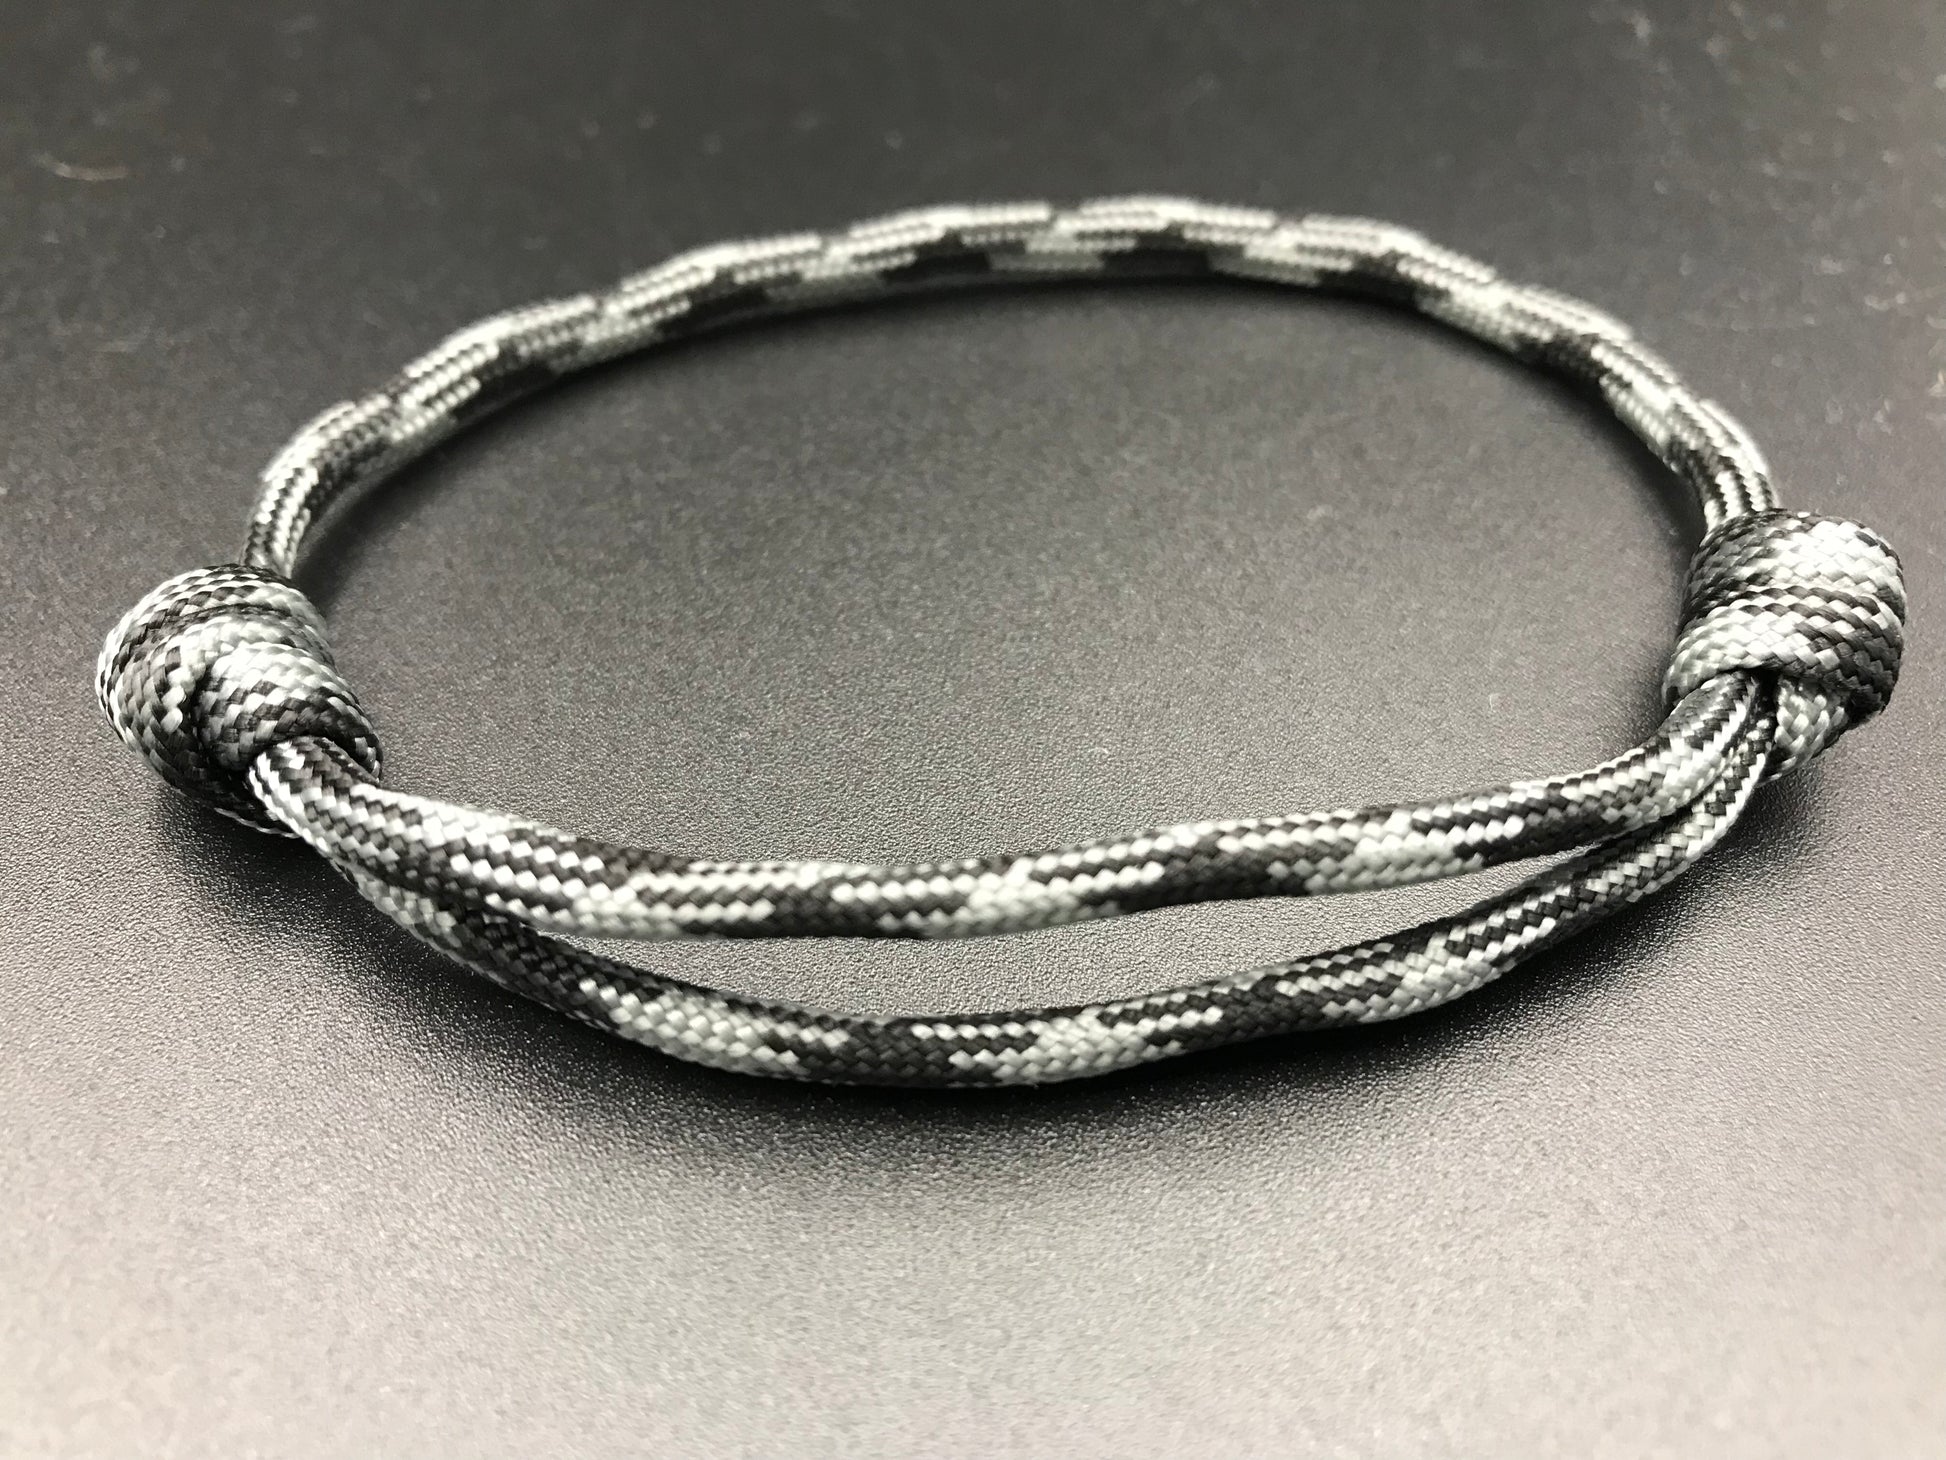 Paracord friendship bracelet In graphite grey ( black & grey) light weight and adjustable